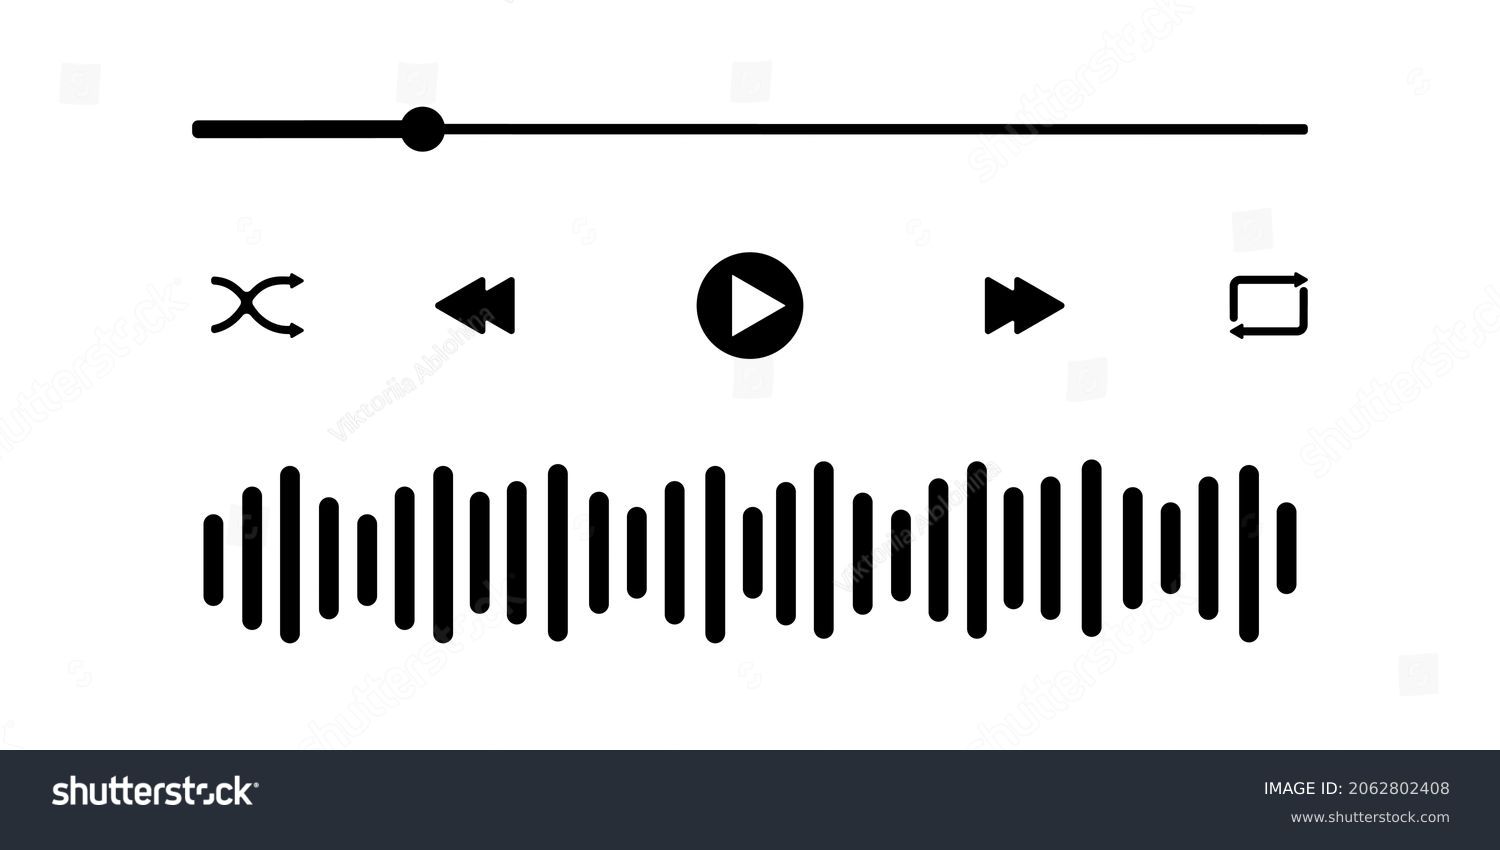 Audio player interface with loading bar, buttons, sound wave icon. Graphic mediaplayer panel template for mobile app. Vector flat illustration. #2062802408